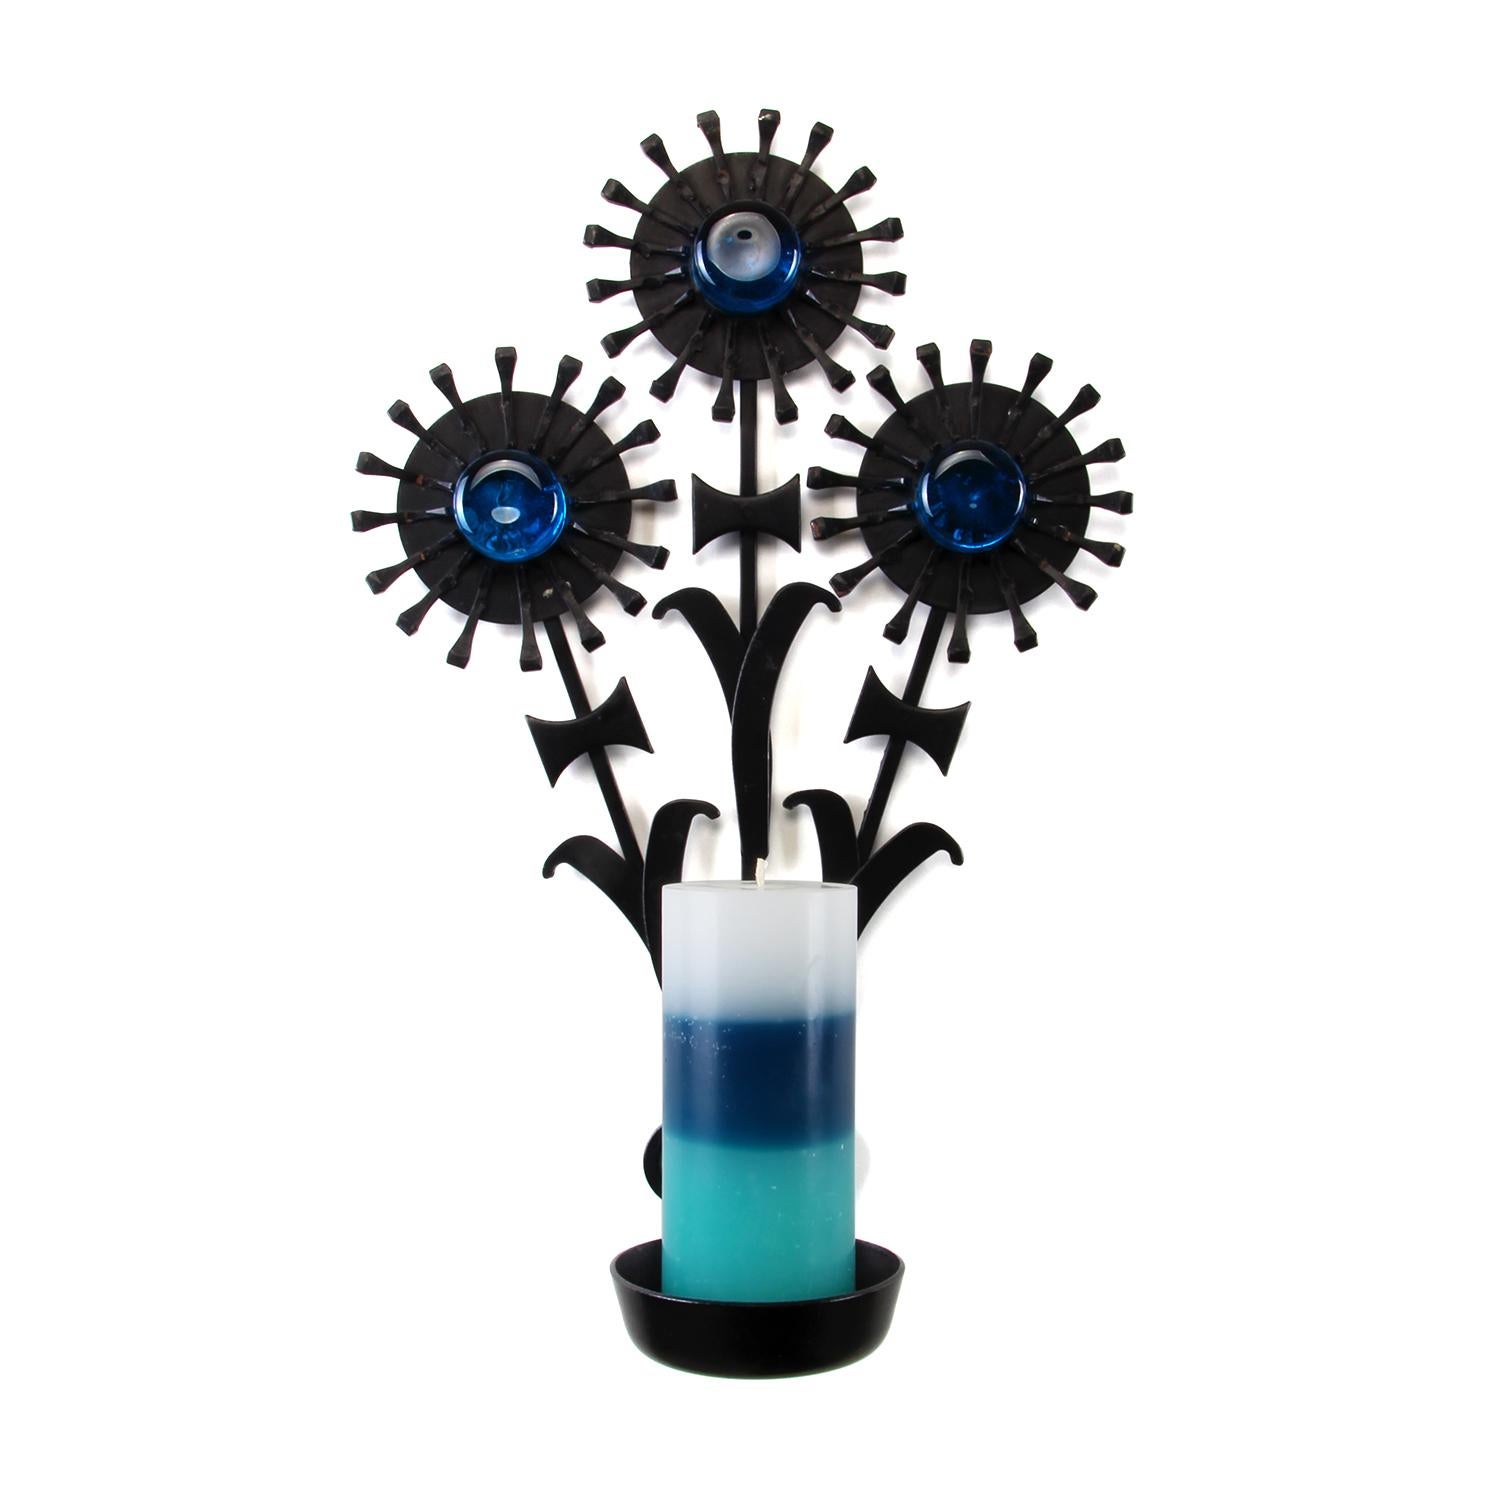 Sconce black iron by Dantoft Kunstartikler Denmark circa 1960s - beautiful and sculptural black candleholder with 3 blue glass stones, in very good vintage condition.

A sculptural sconce made in black lacquered, welded iron and three round